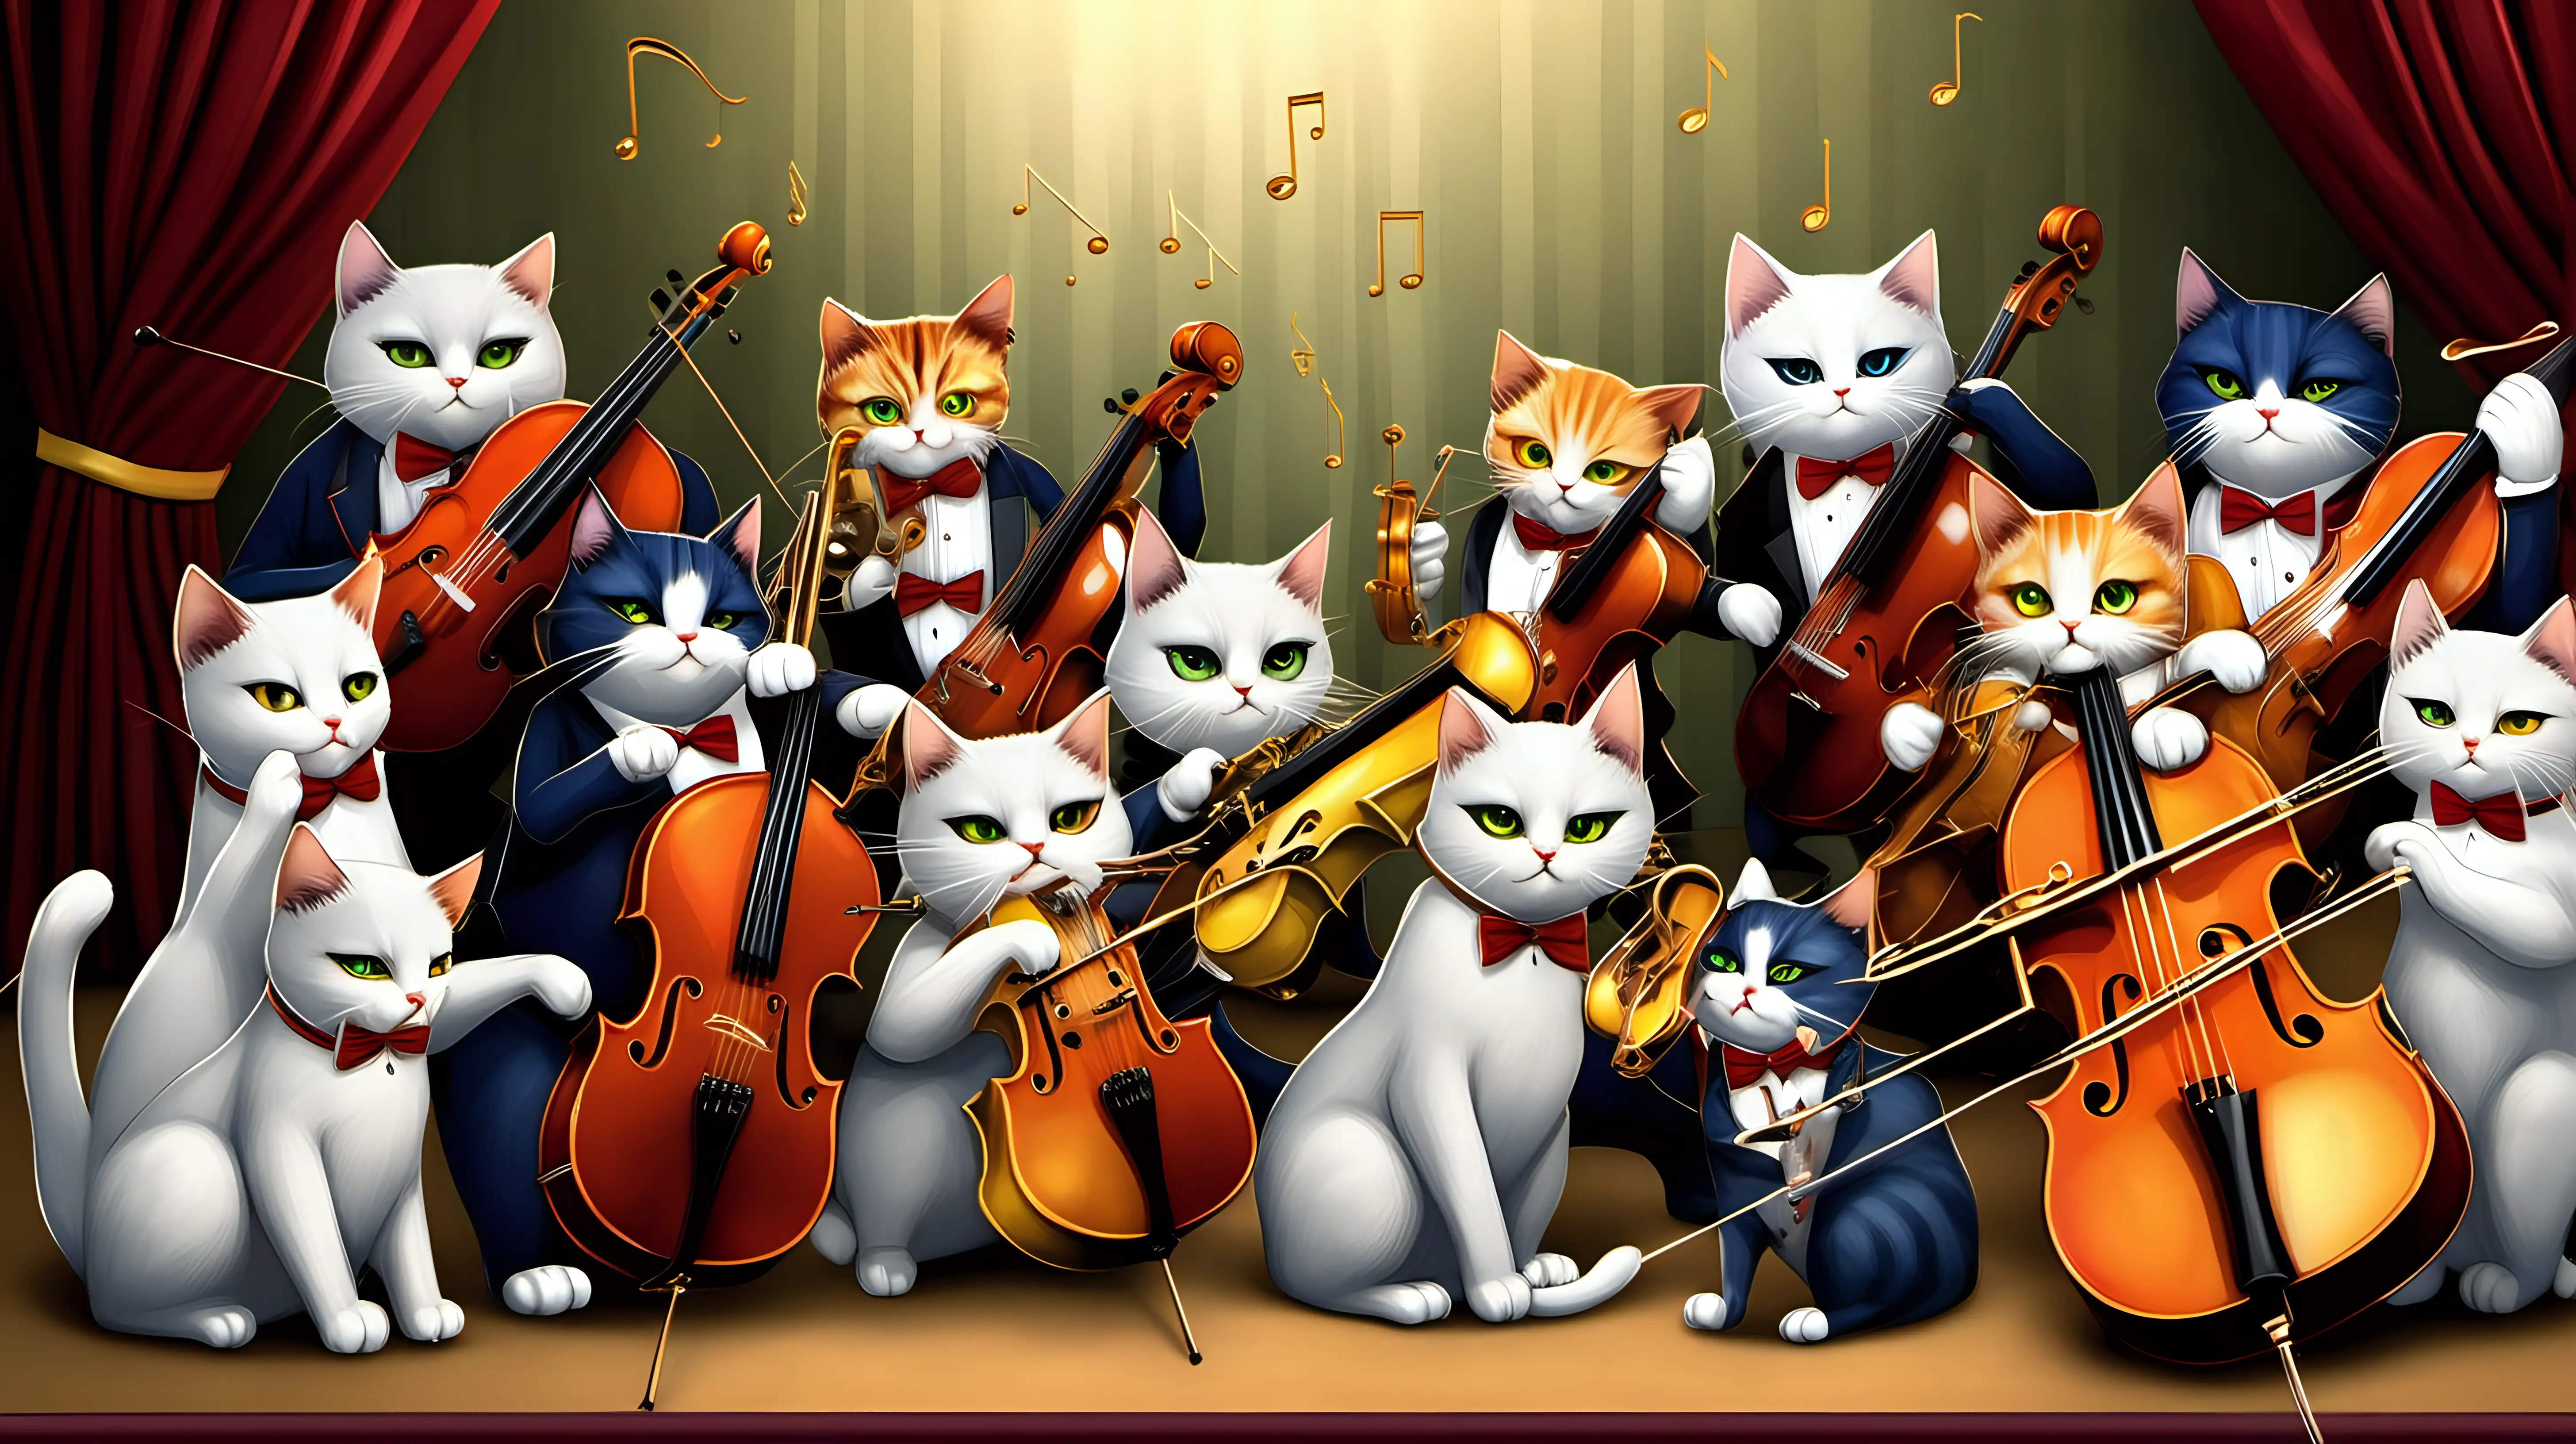 "Generate a sophisticated cat orchestra playing a symphony of cuteness, each cat musician with its own musical instrument, creating a harmonious and delightful scene."